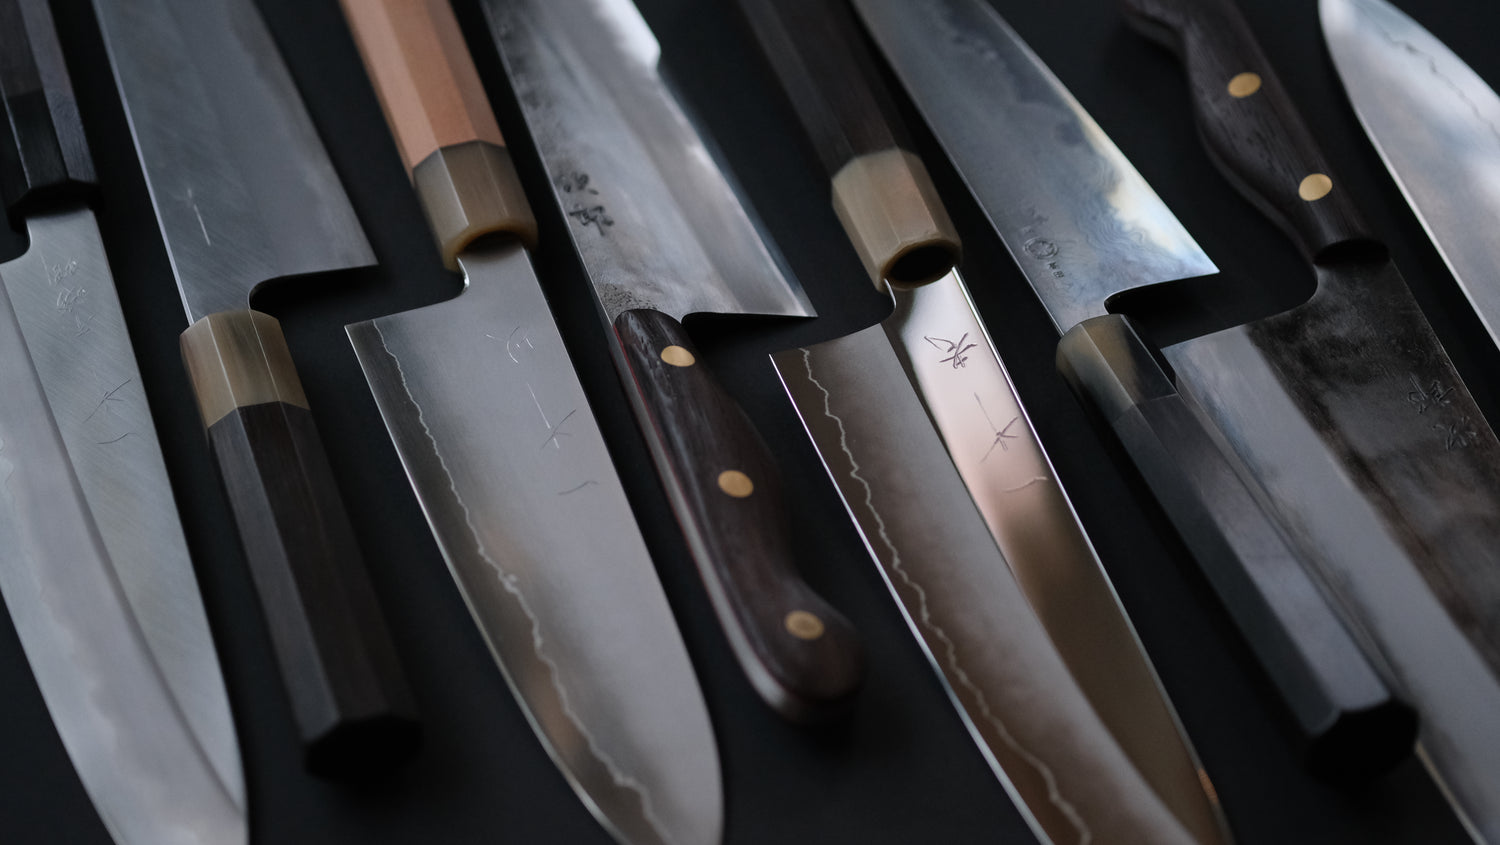 How to Select the Best Japanese Knives: All You Need to Know